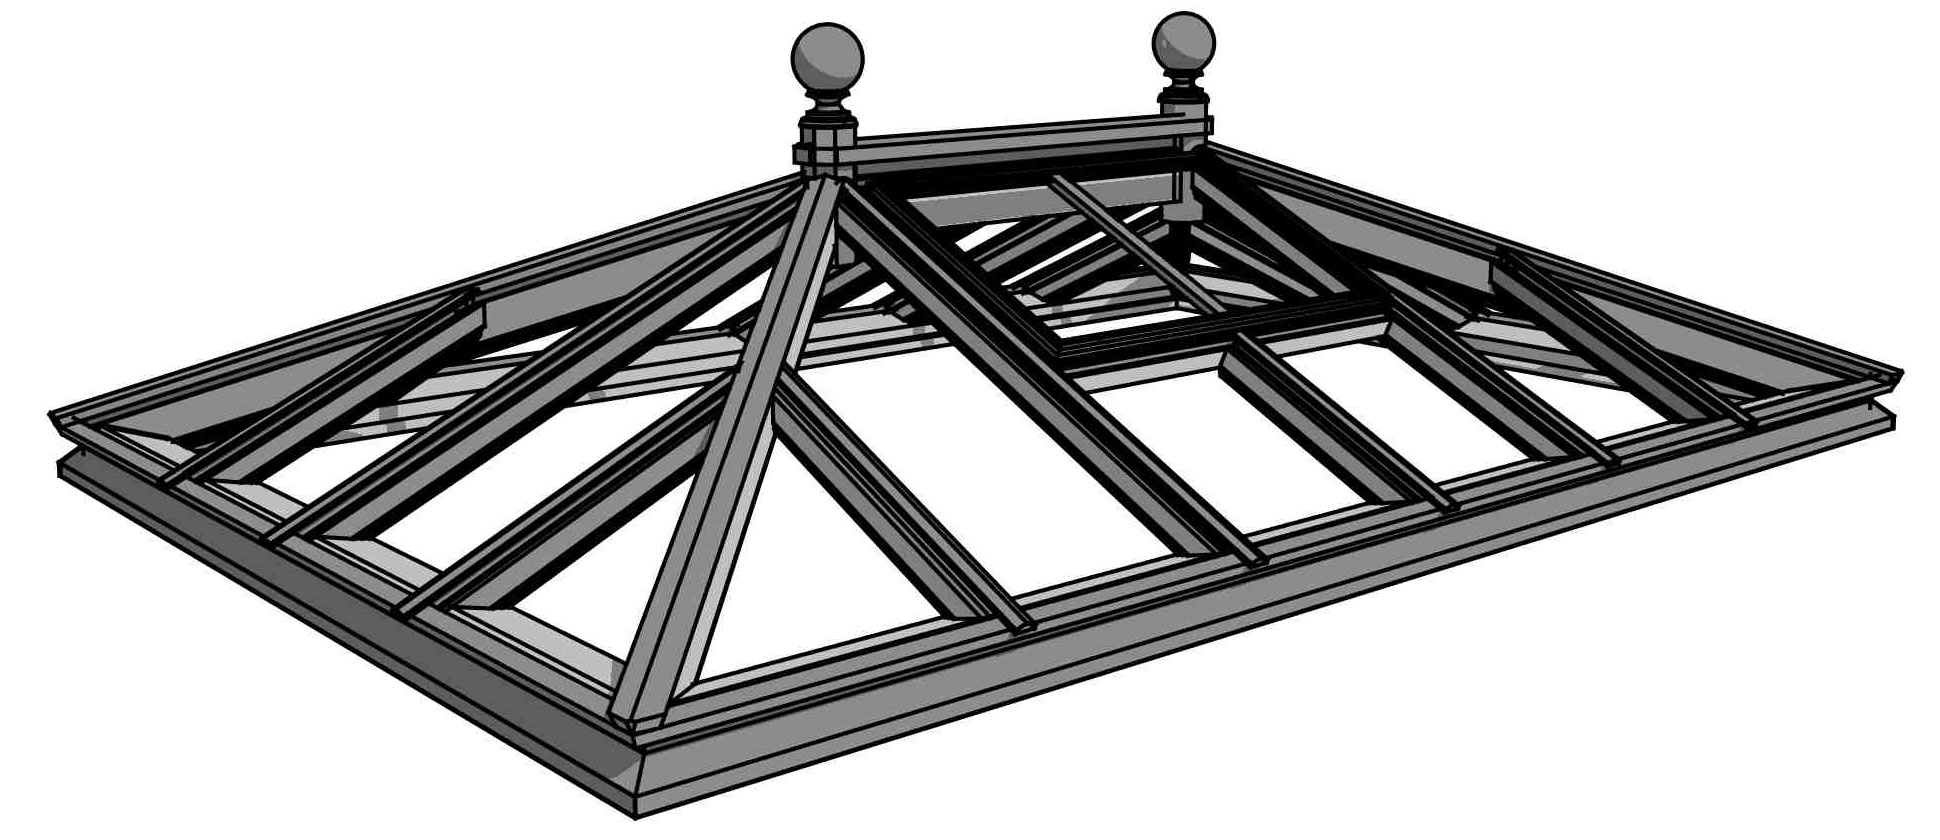 Just Roof Lanterns Classic Collection of Roof Lanterns